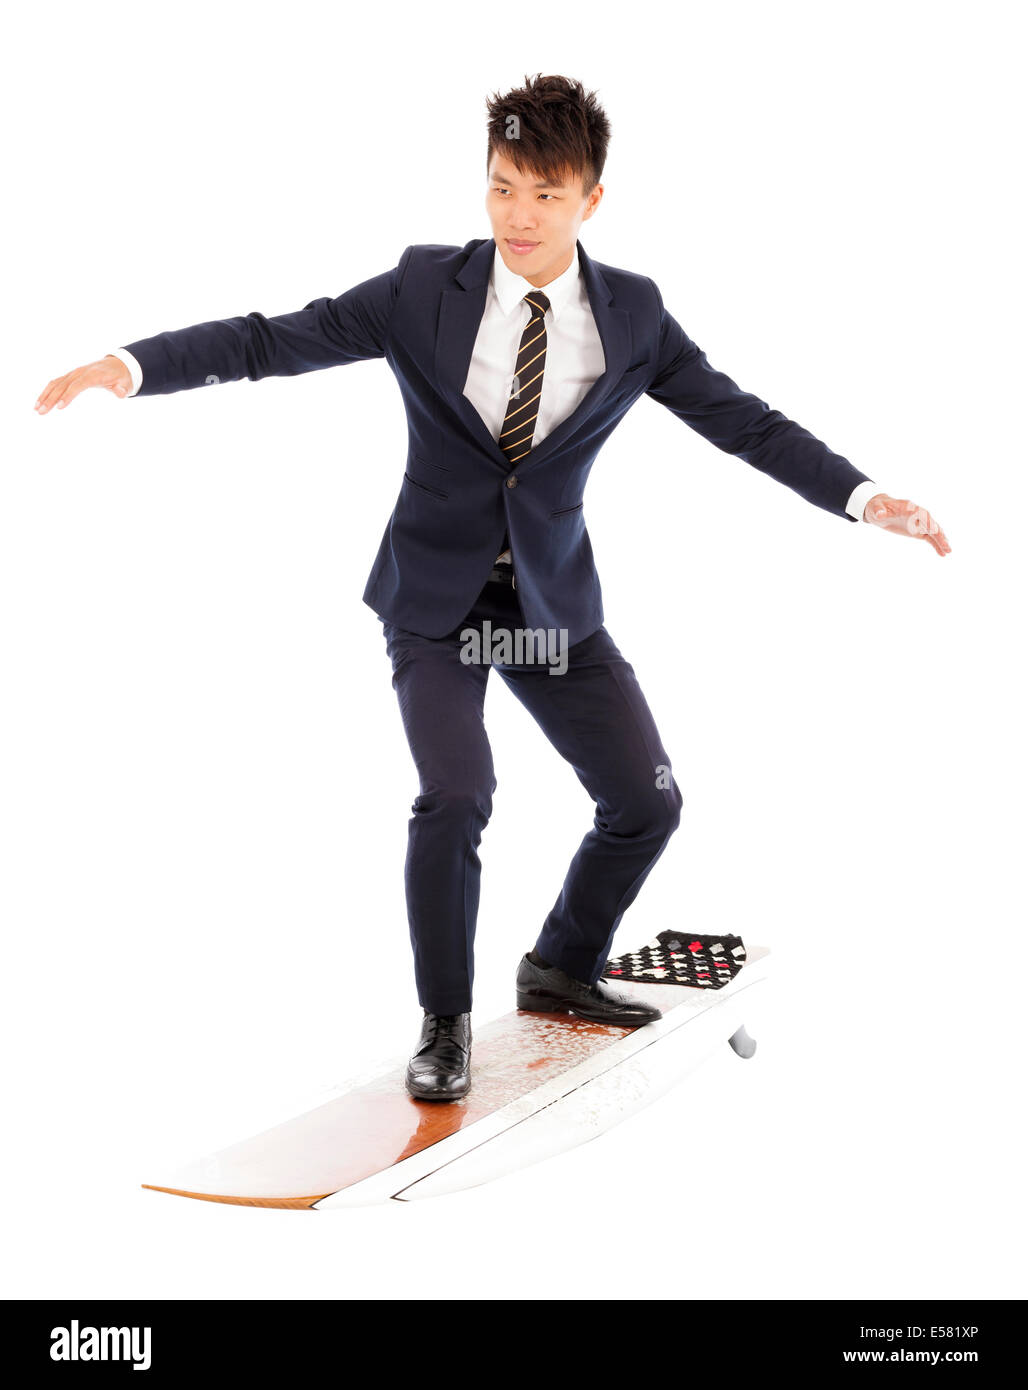 businessman practice surfing pose with suit Stock Photo